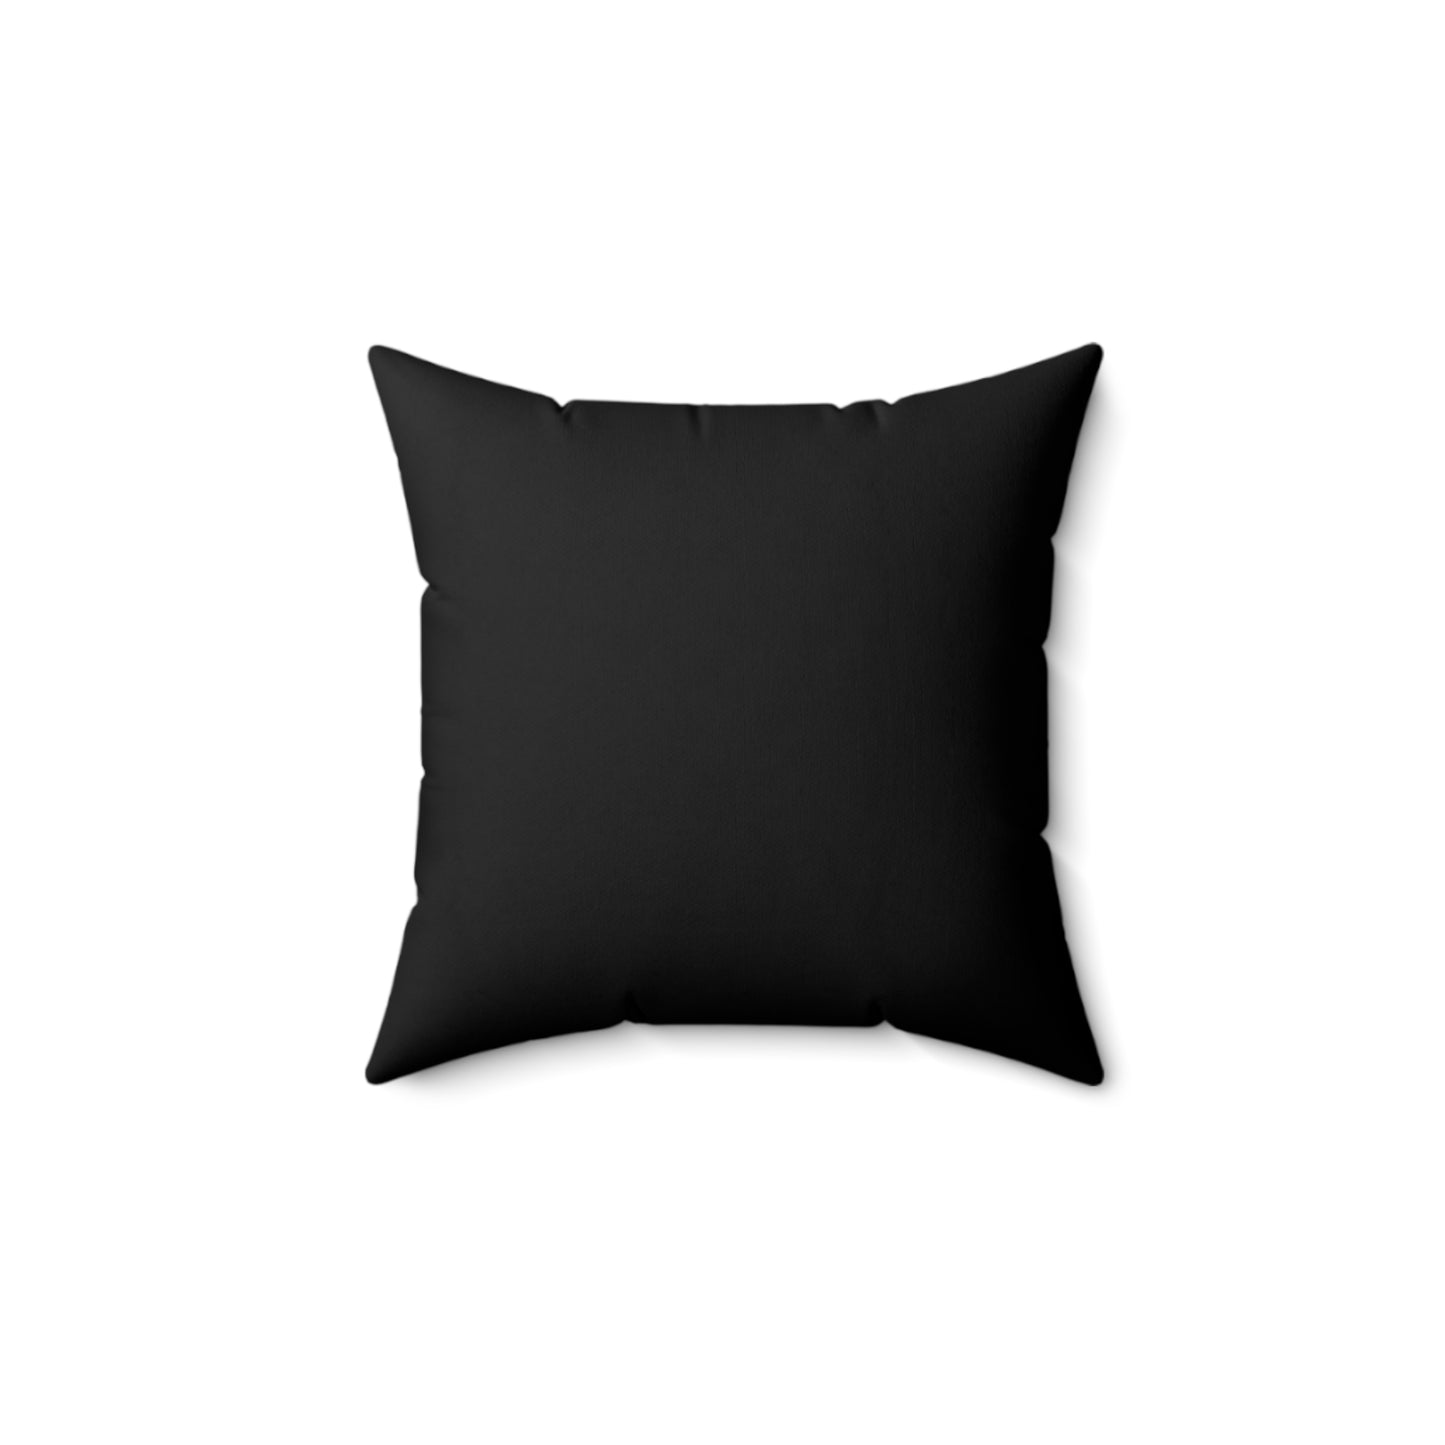 Prayer Changes Outcomes pillow